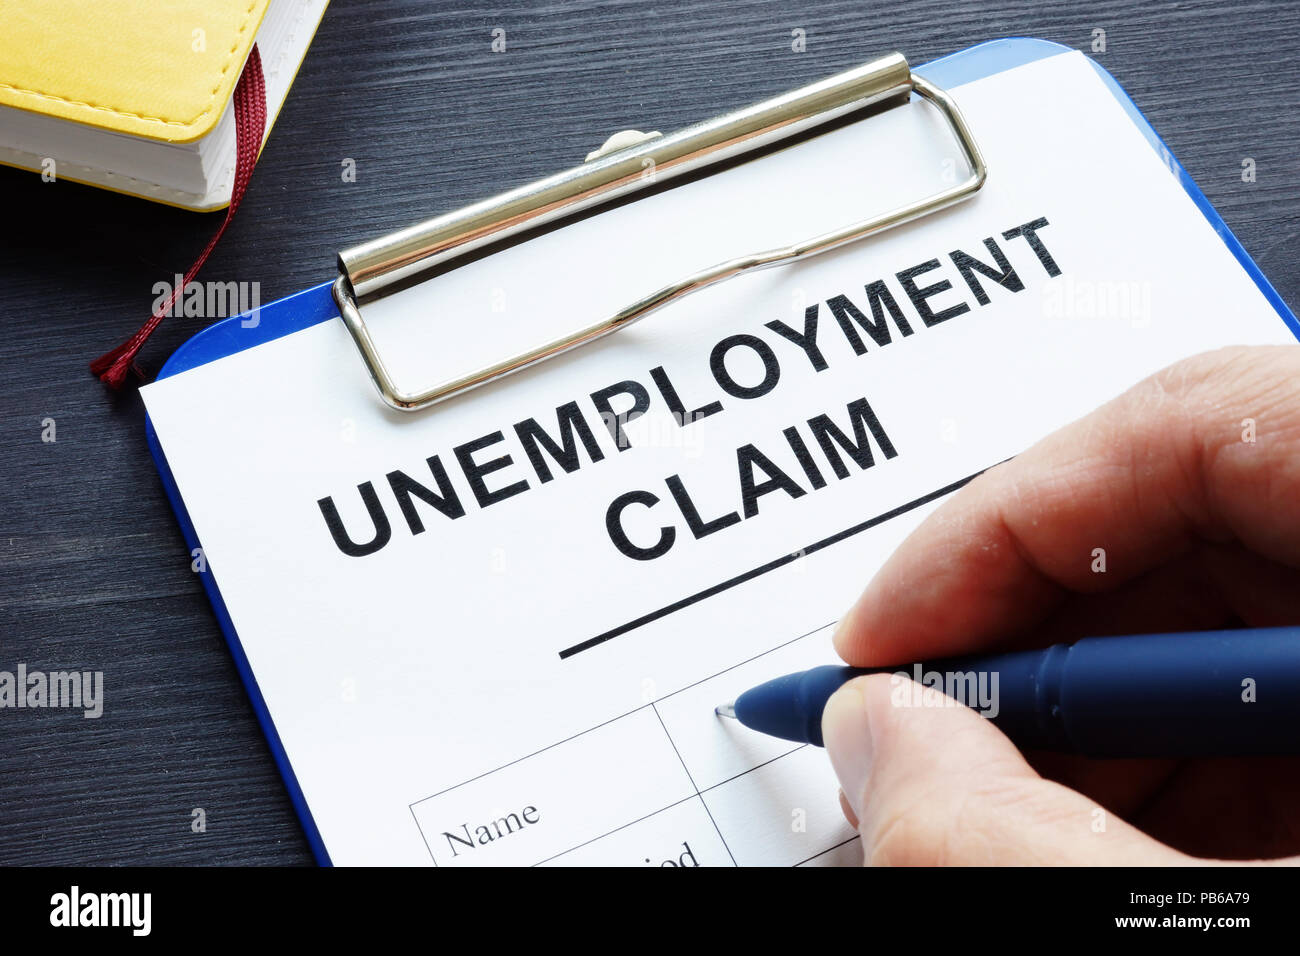 Man is filling in Unemployment claim form. Stock Photo